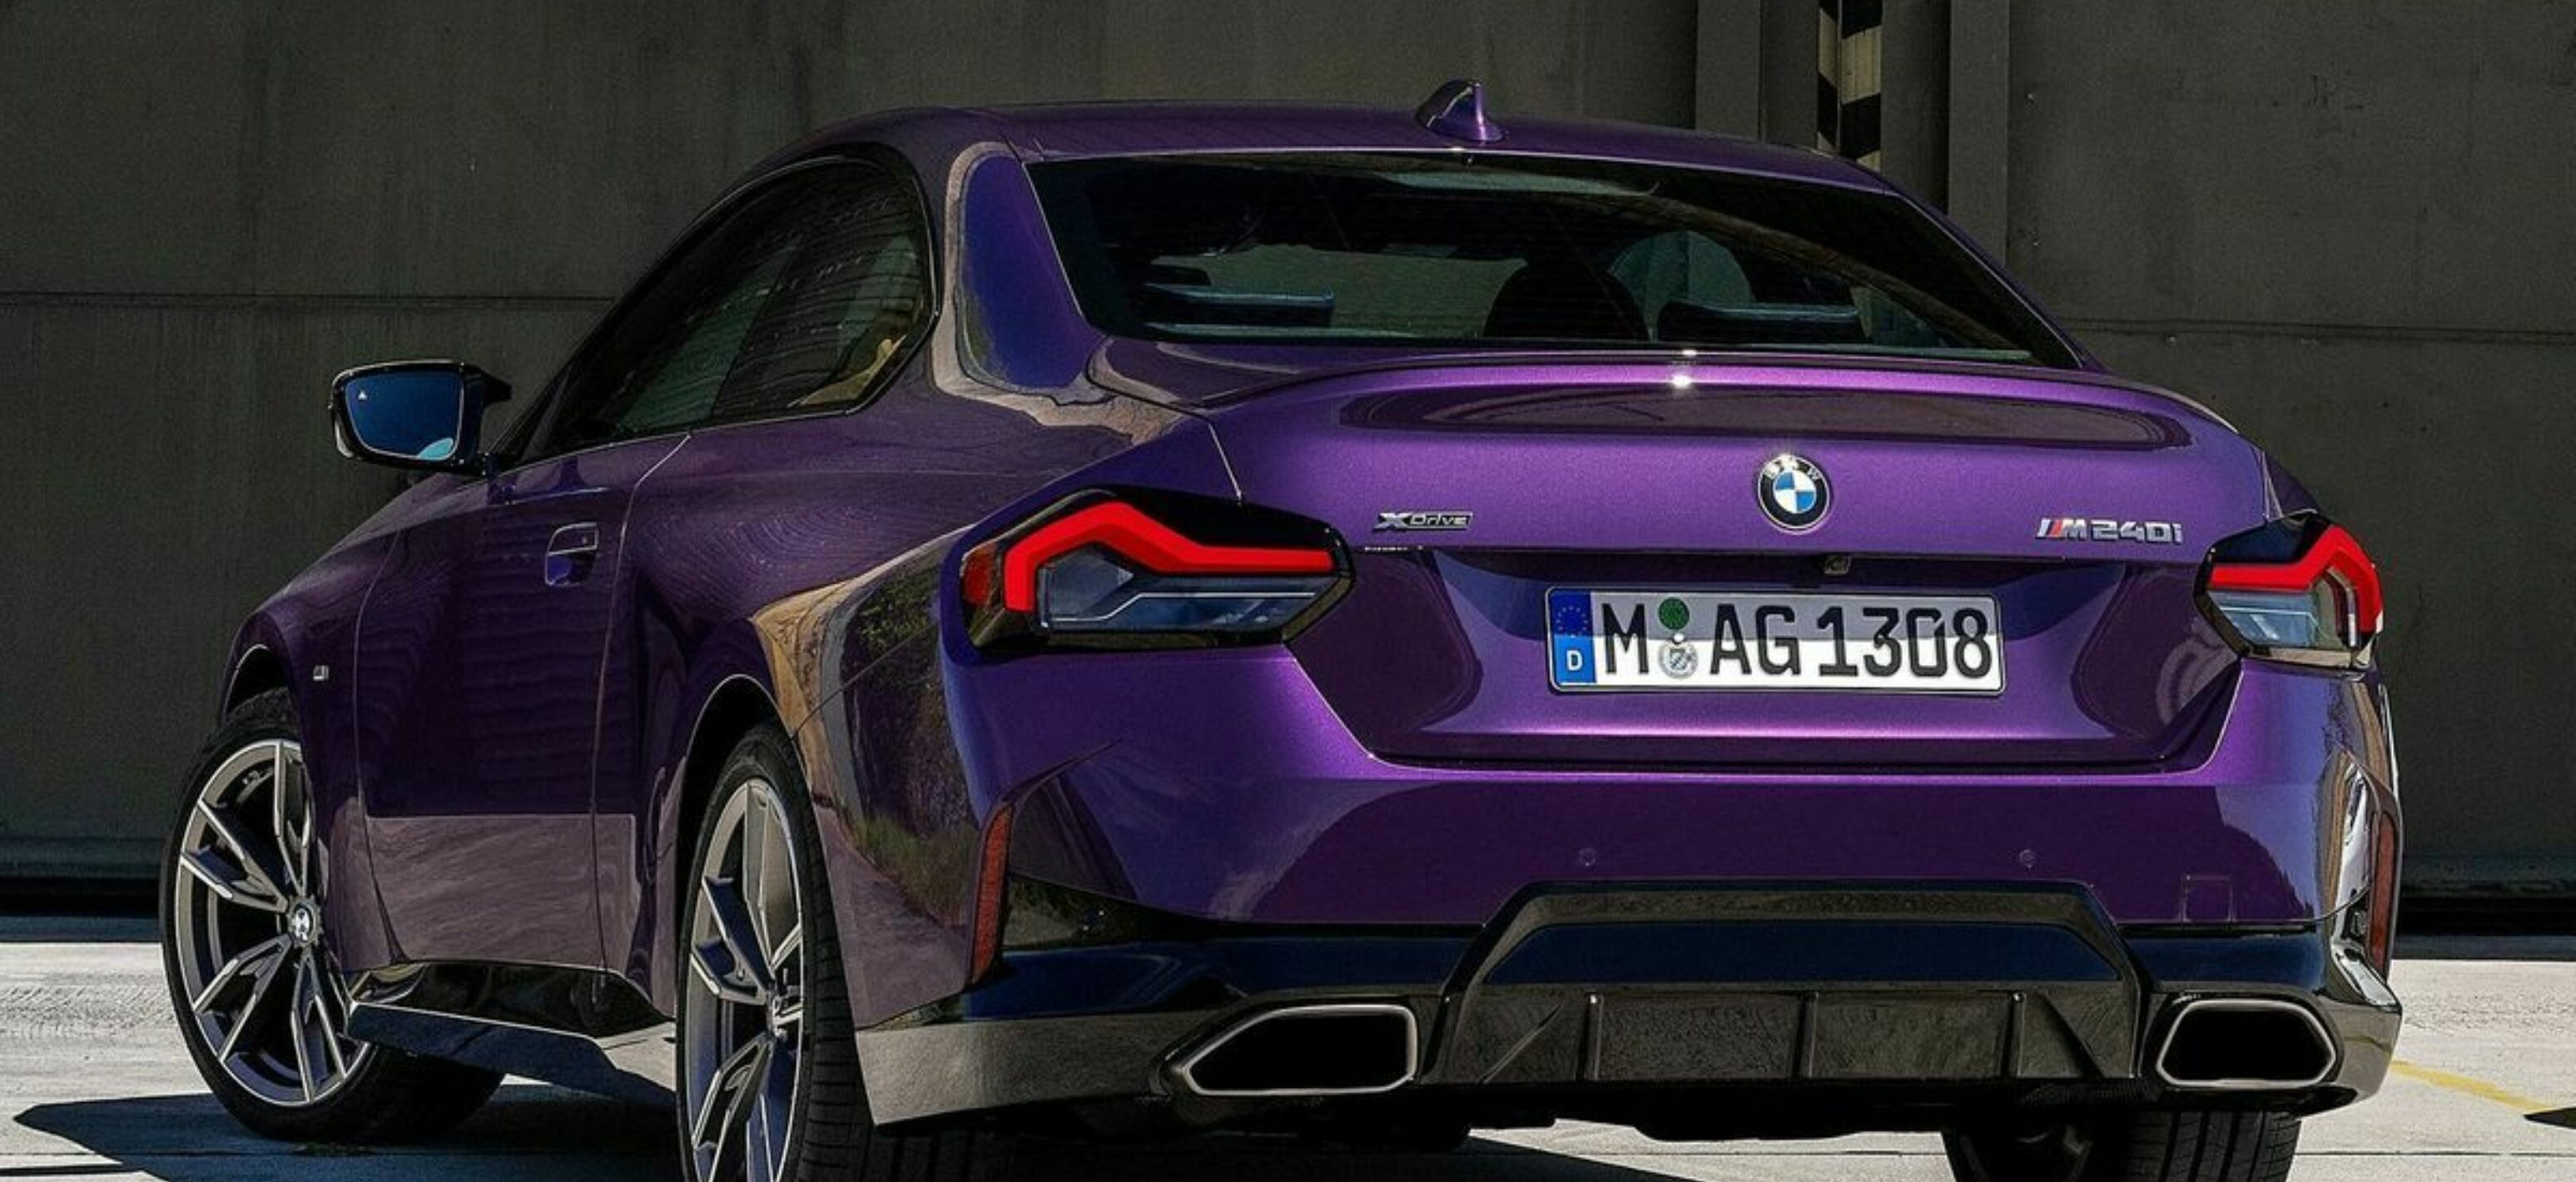 https://autofilter.sk/assets/images/rad-2-coupe/gallery/bmw-m240i-xdrive-coupe-2021_11-galeria.jpg - obrazok